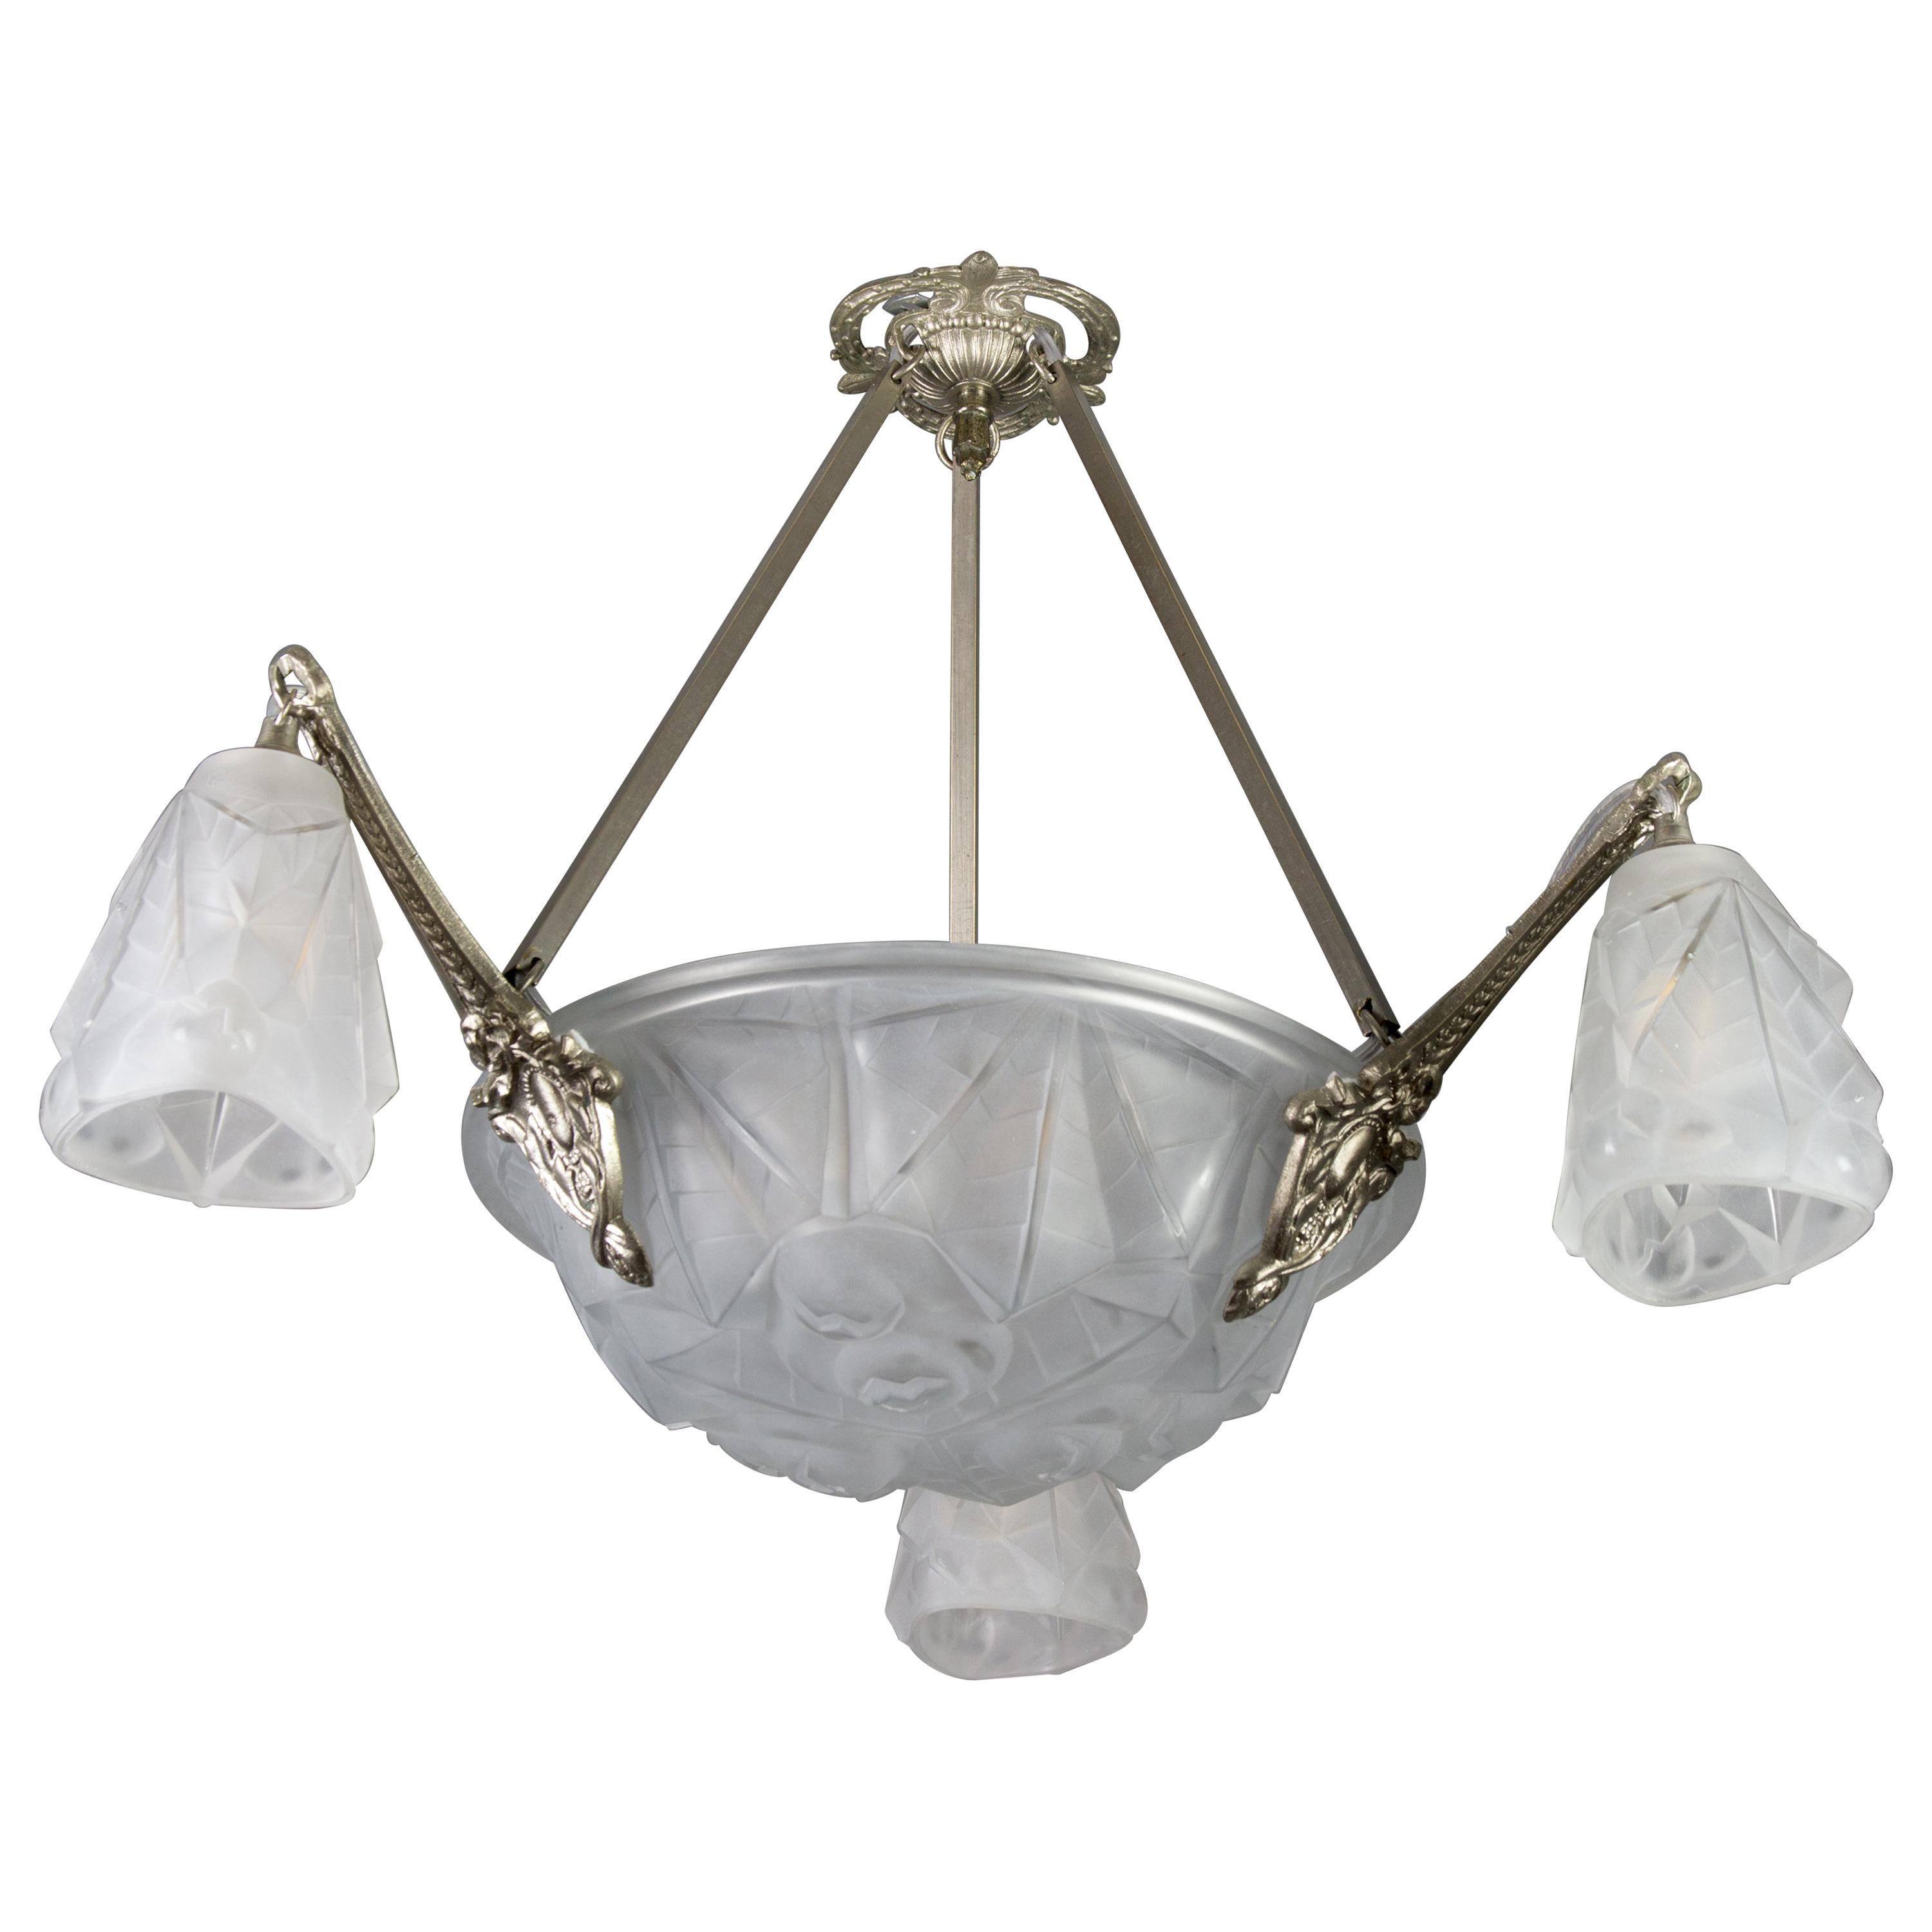 French Art Deco Frosted Glass and Brass Six-Light Chandelier by Degué, 1920s For Sale